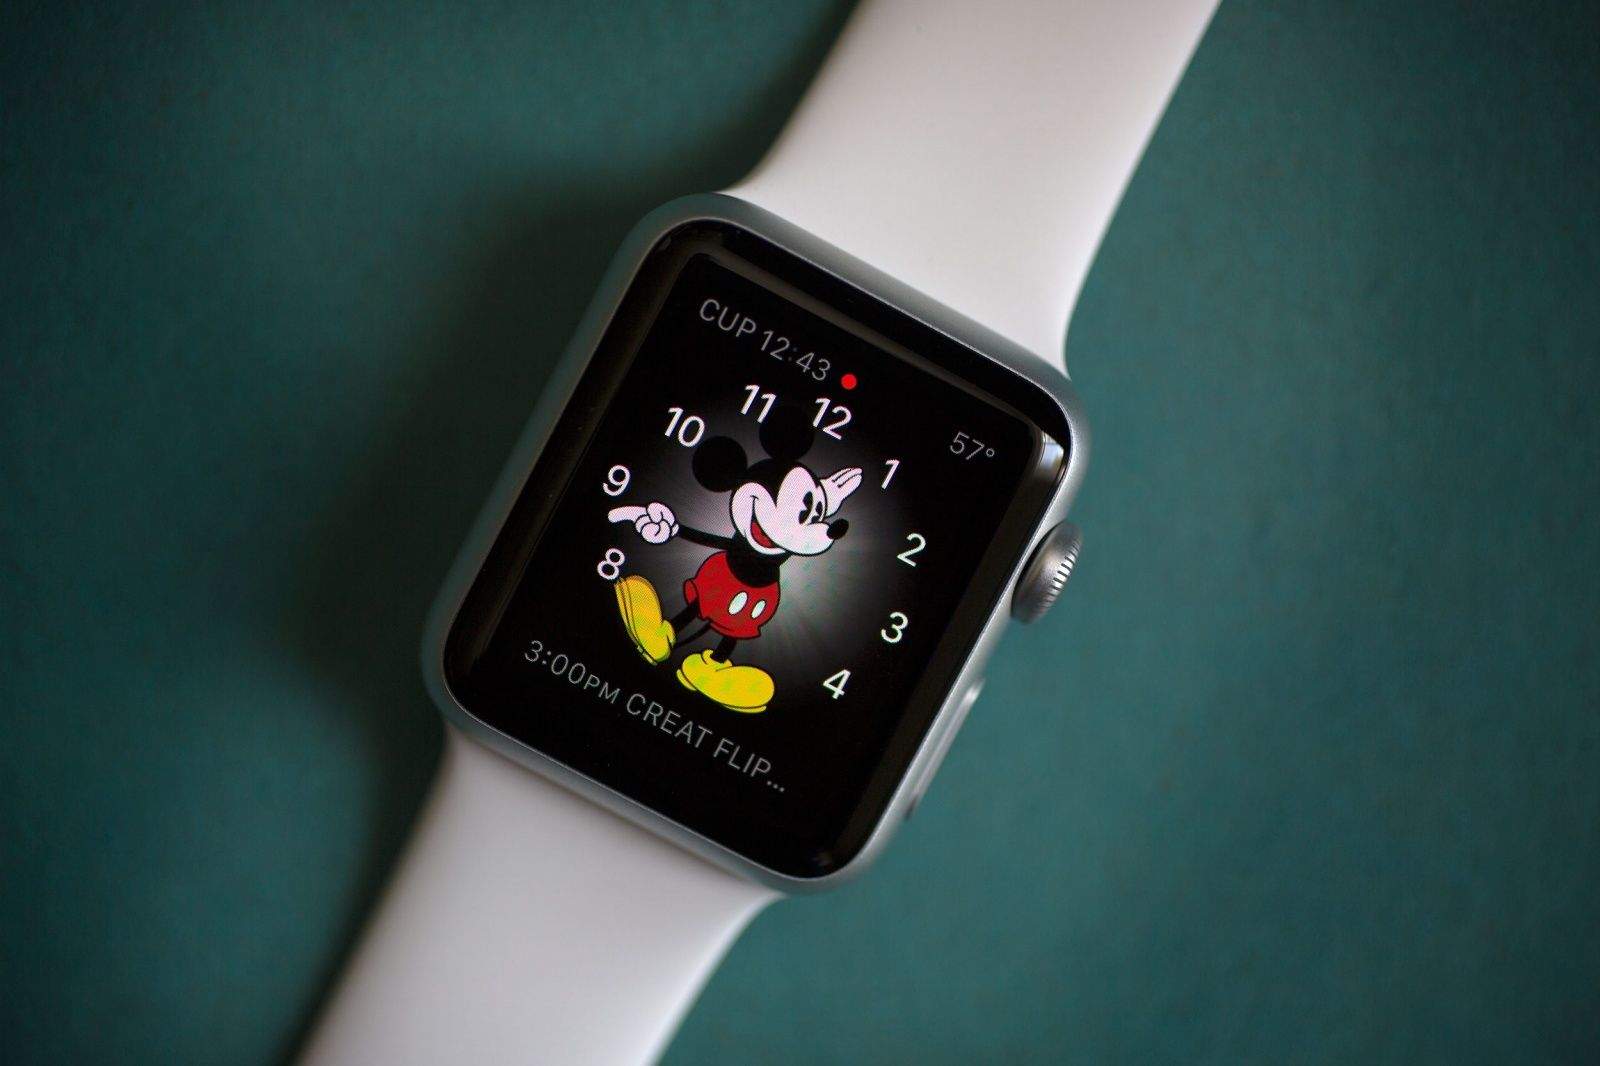 Apple Watch sales figures are basically analyst roulette right now.